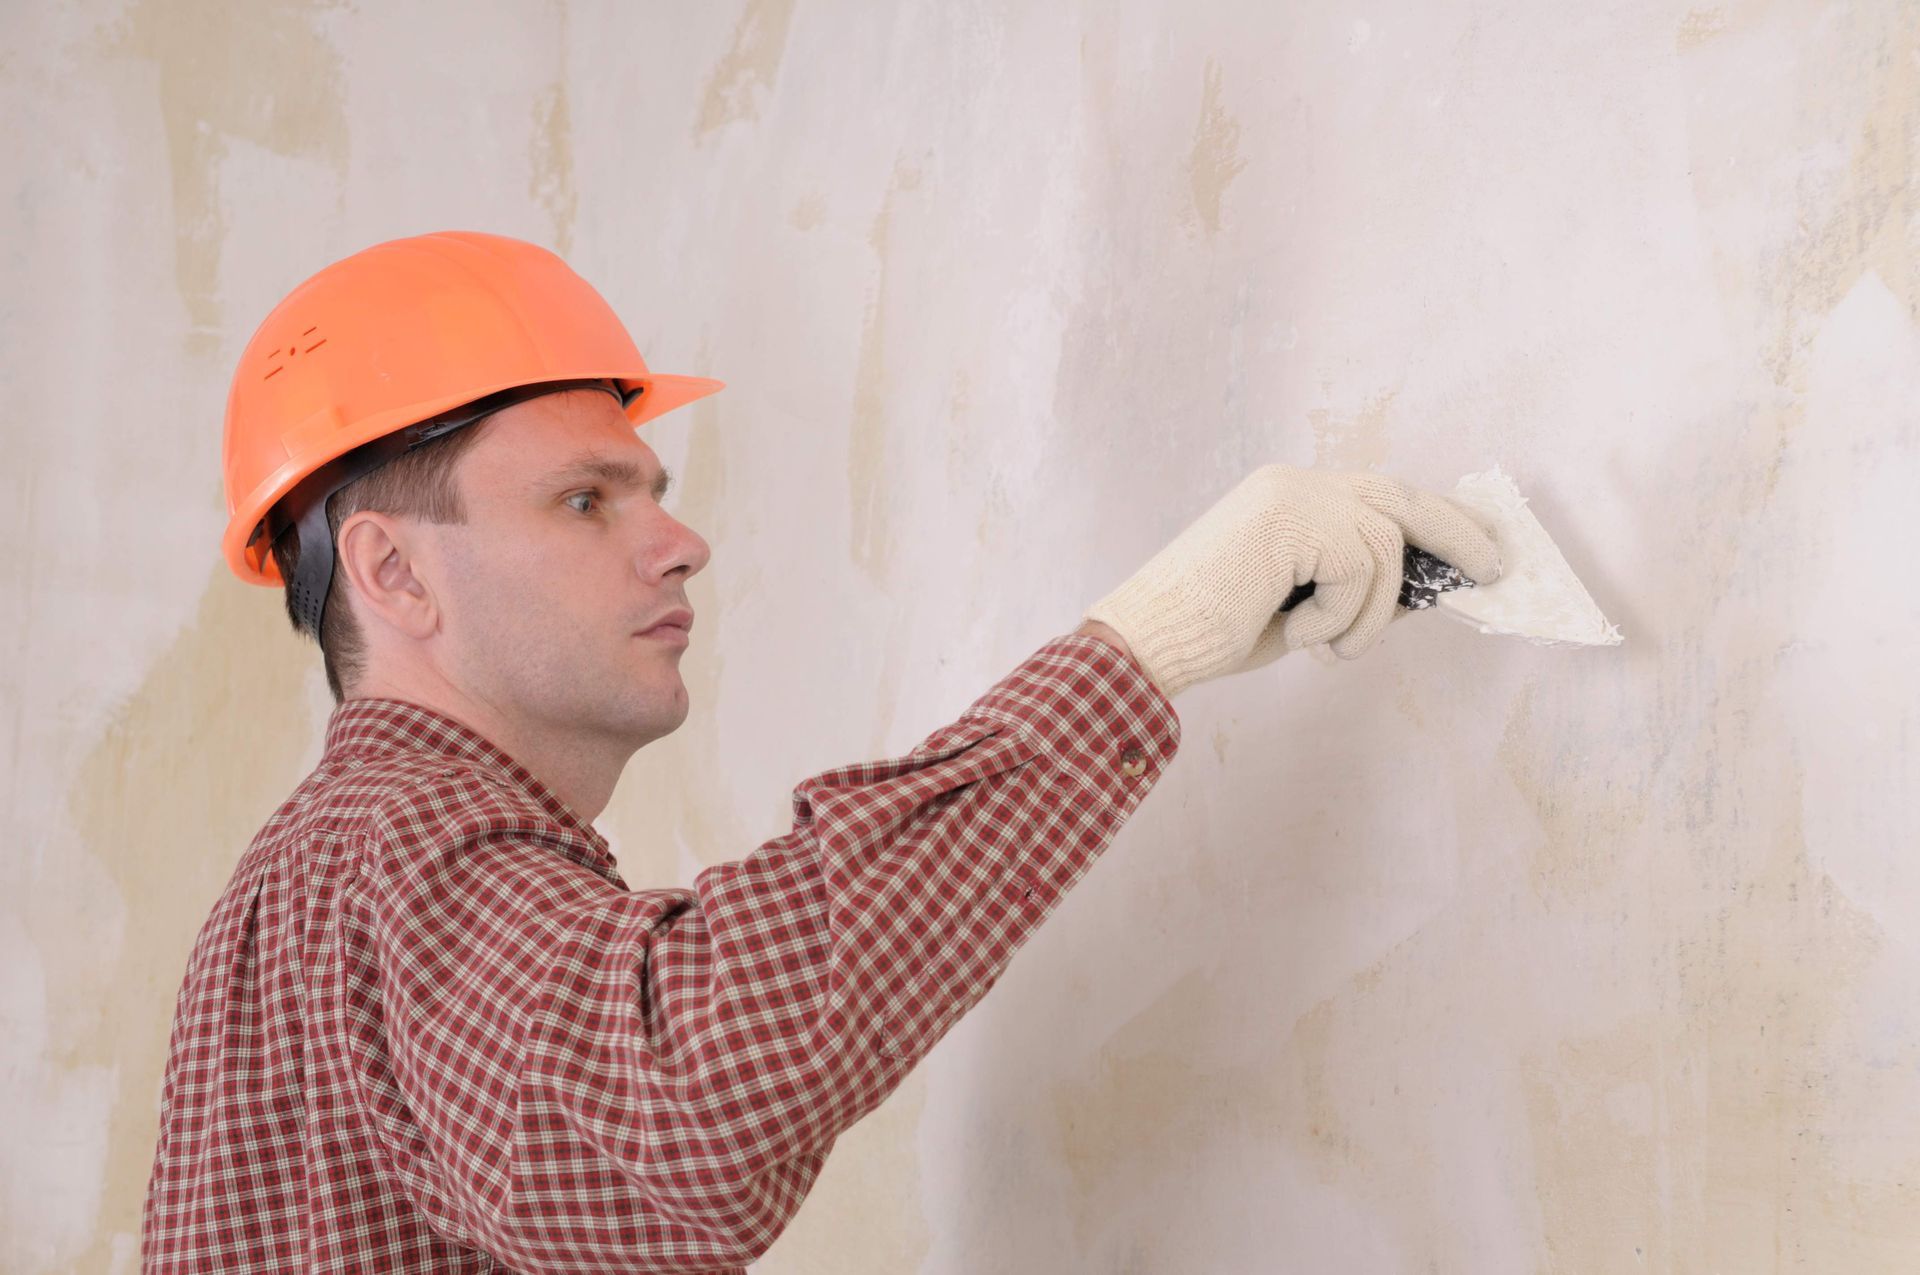 A man wearing a hard hat and gloves is plastering a wall with a spatula